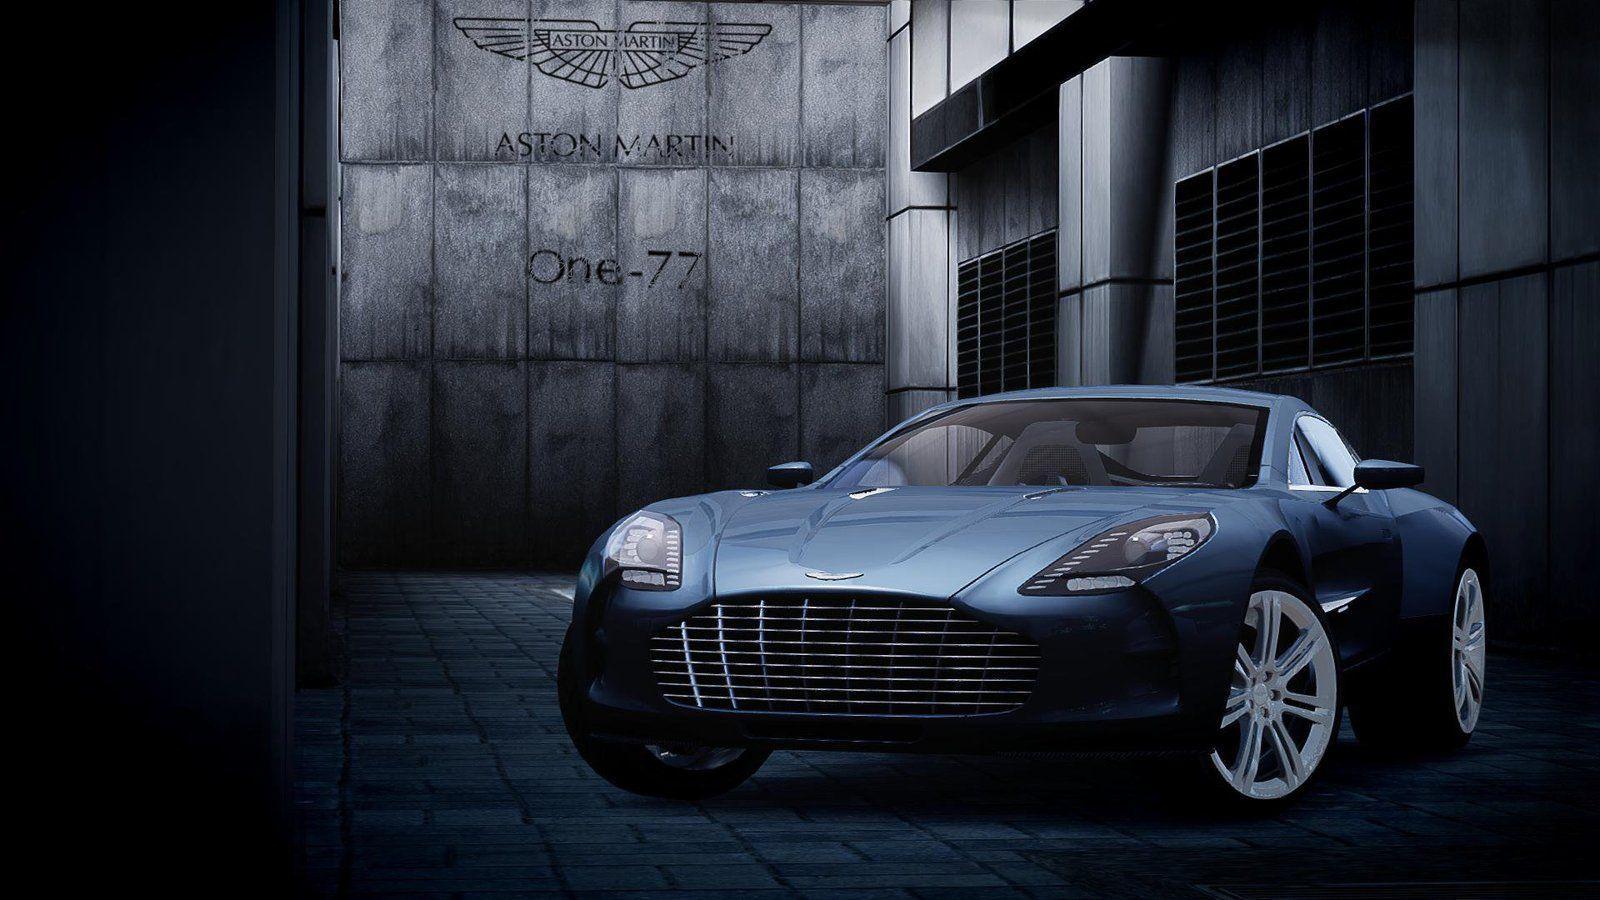 Aston Martin One 77 4k Hd Wallpapers Free Download